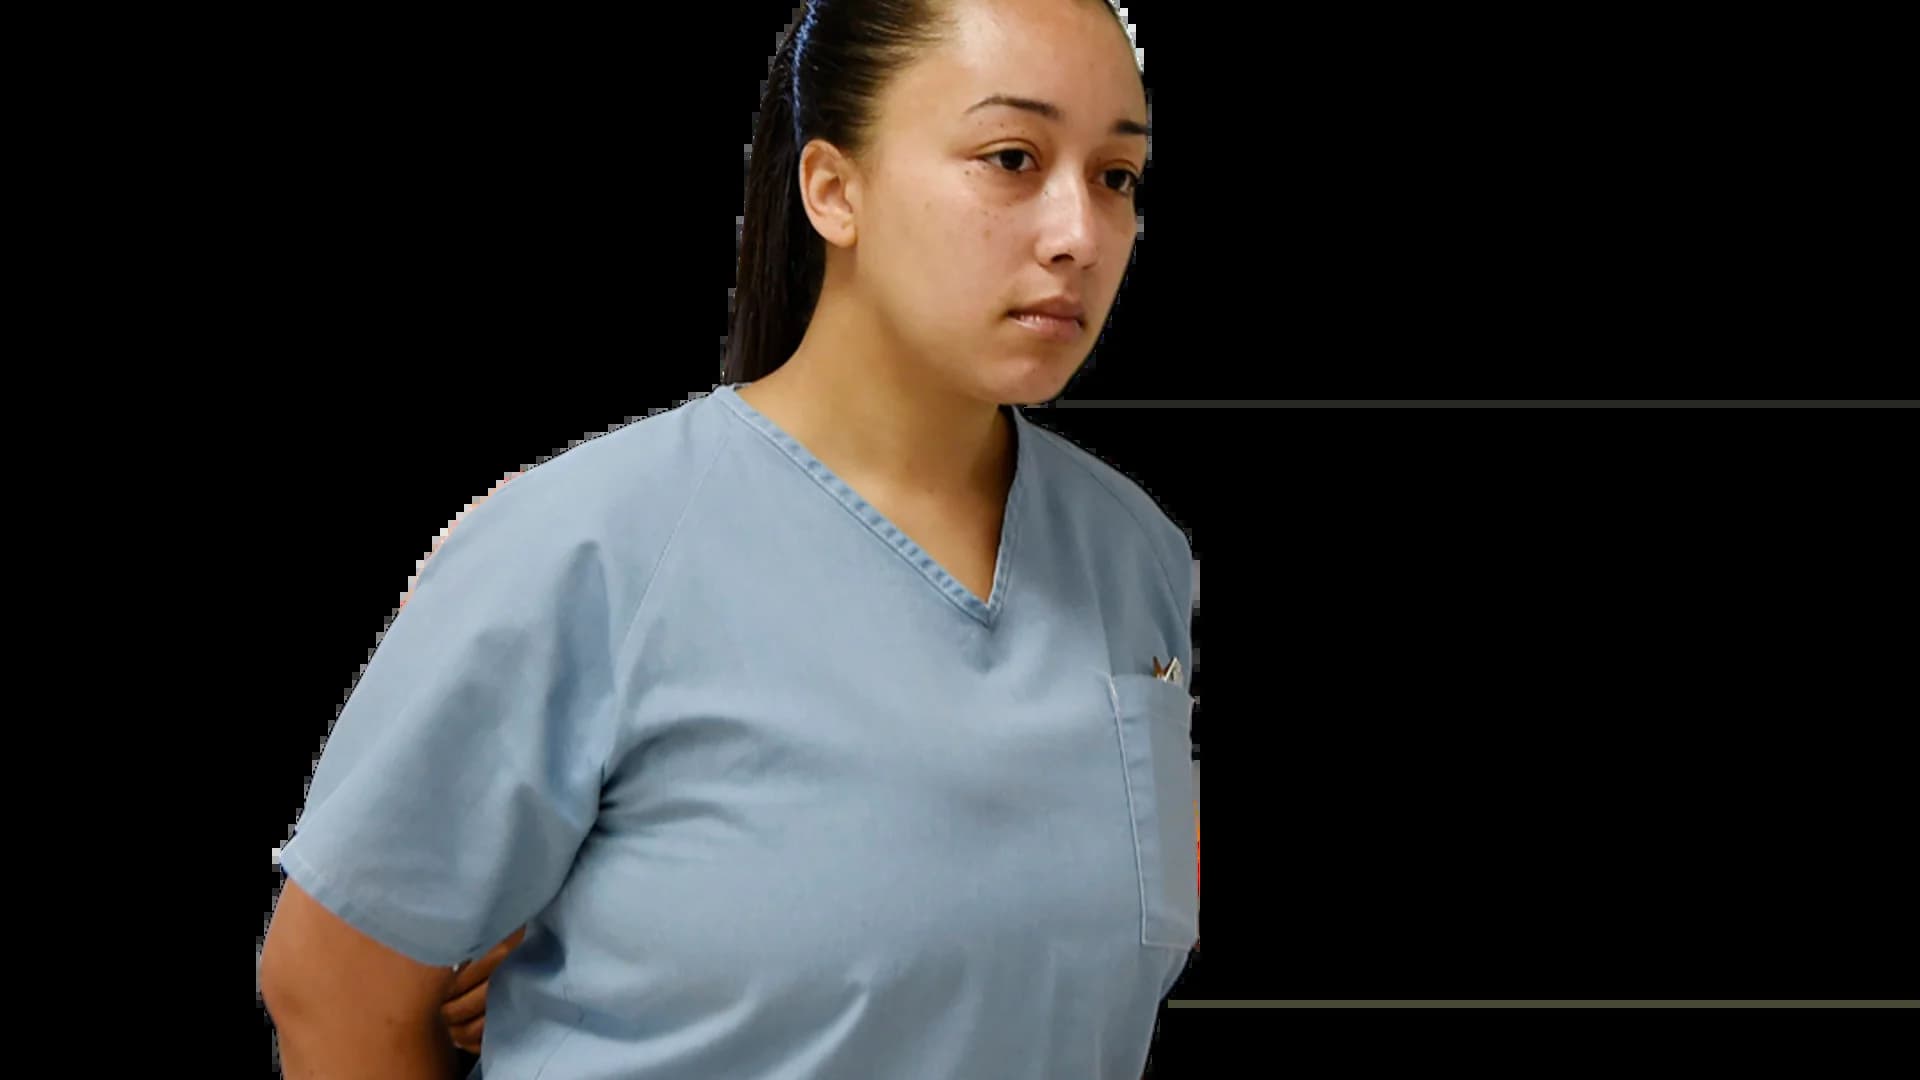 Cyntoia Brown released from prison after clemency